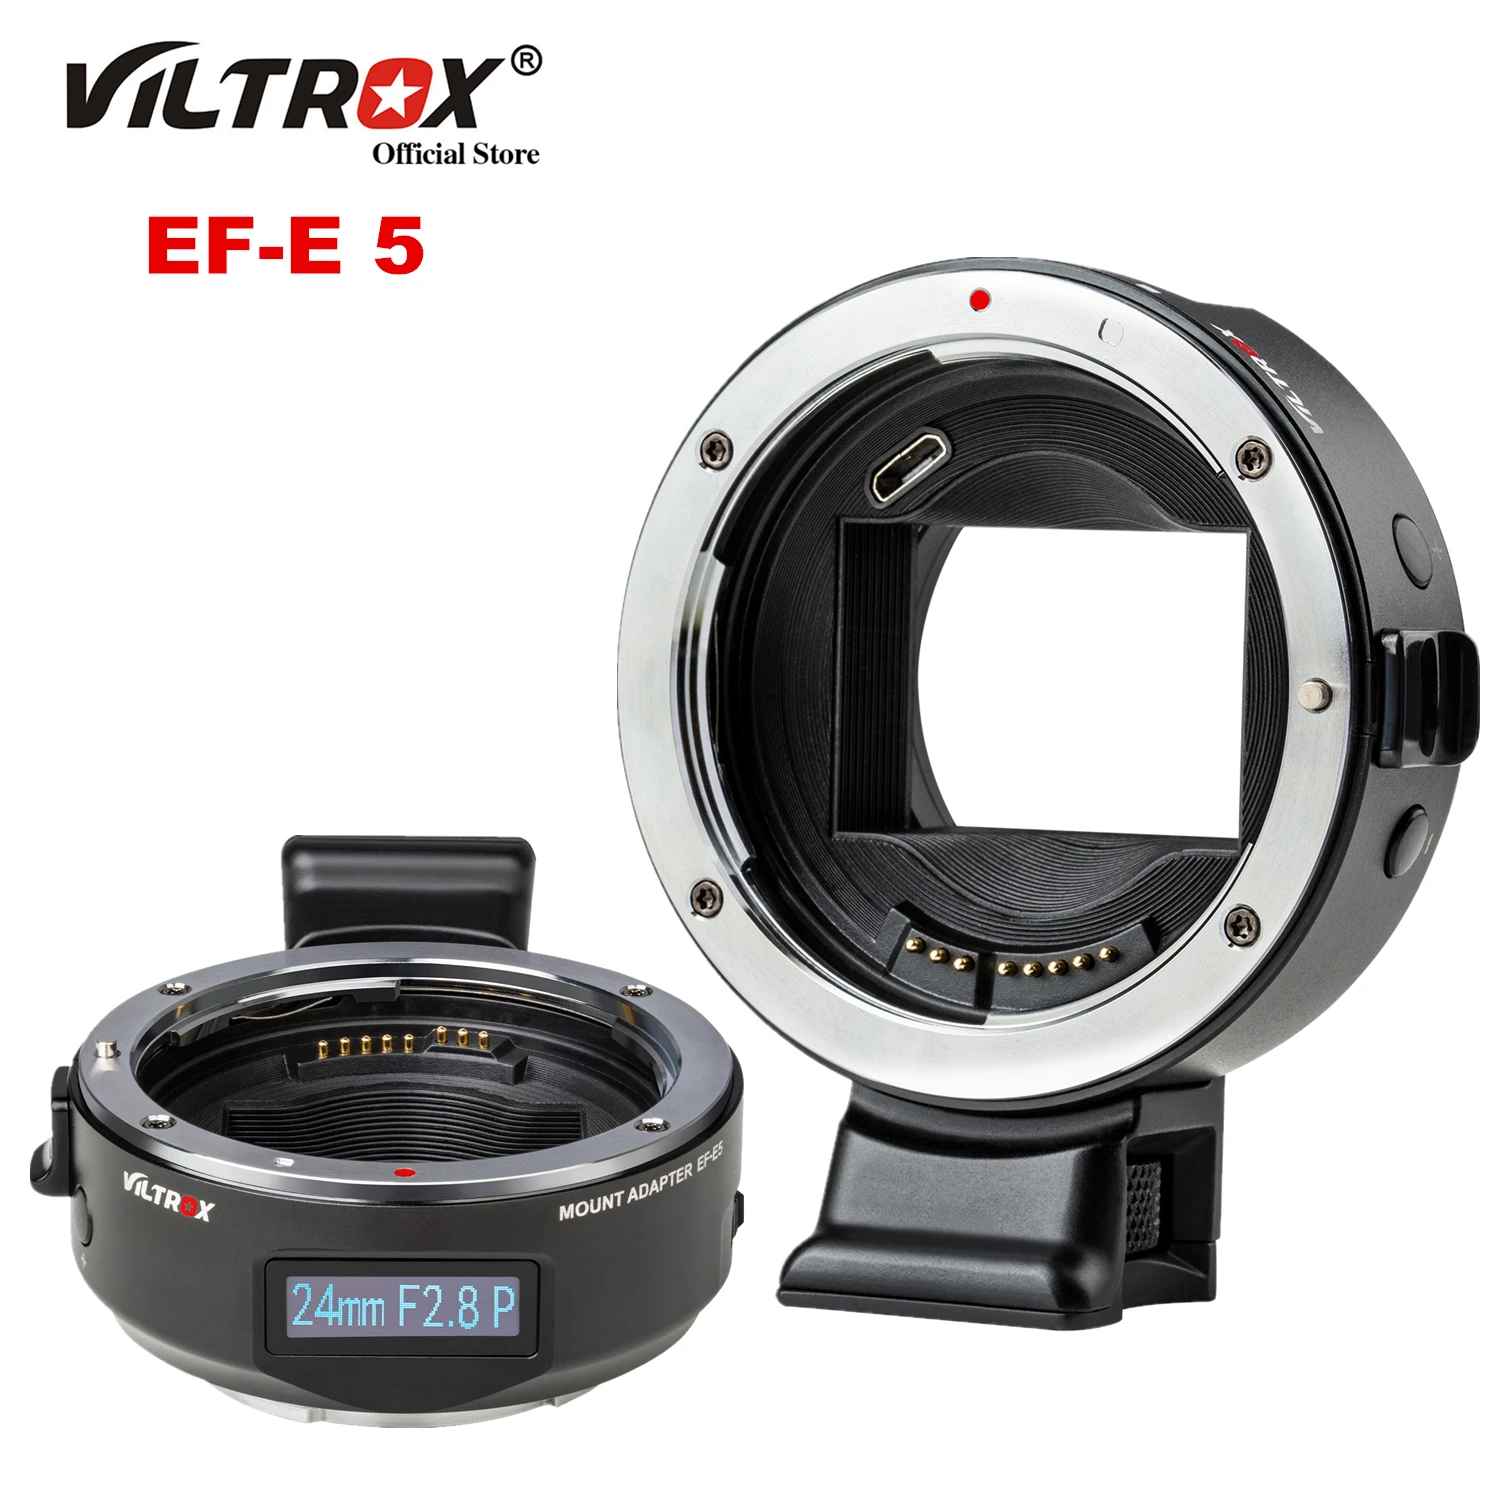 

Viltrox EF-E5 Auto Focus Smart Lens Adapter OLED Display Full Frame For Canon EOS EF EF-S Lens To Sony E Mount Camera A9 A7II